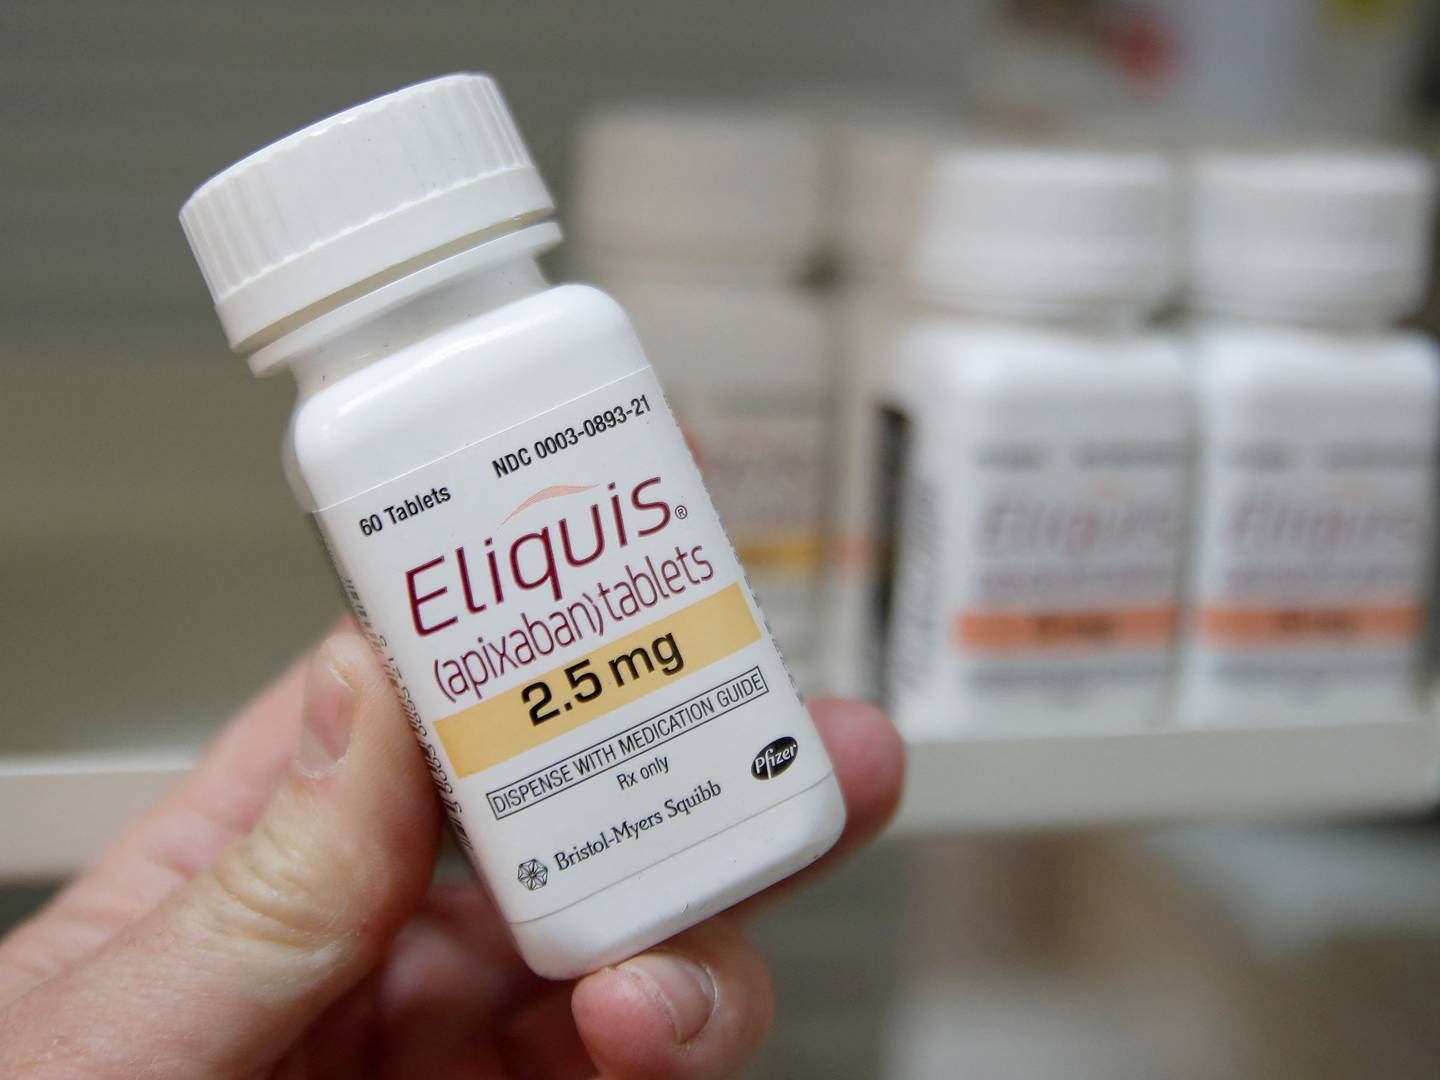 Bristol Myers Squibb owns blood thinner Eliquis along with Pfizer. Analysts expect it to feature among ten drugs initially chosen for price negotiations in the Medicare program in September.